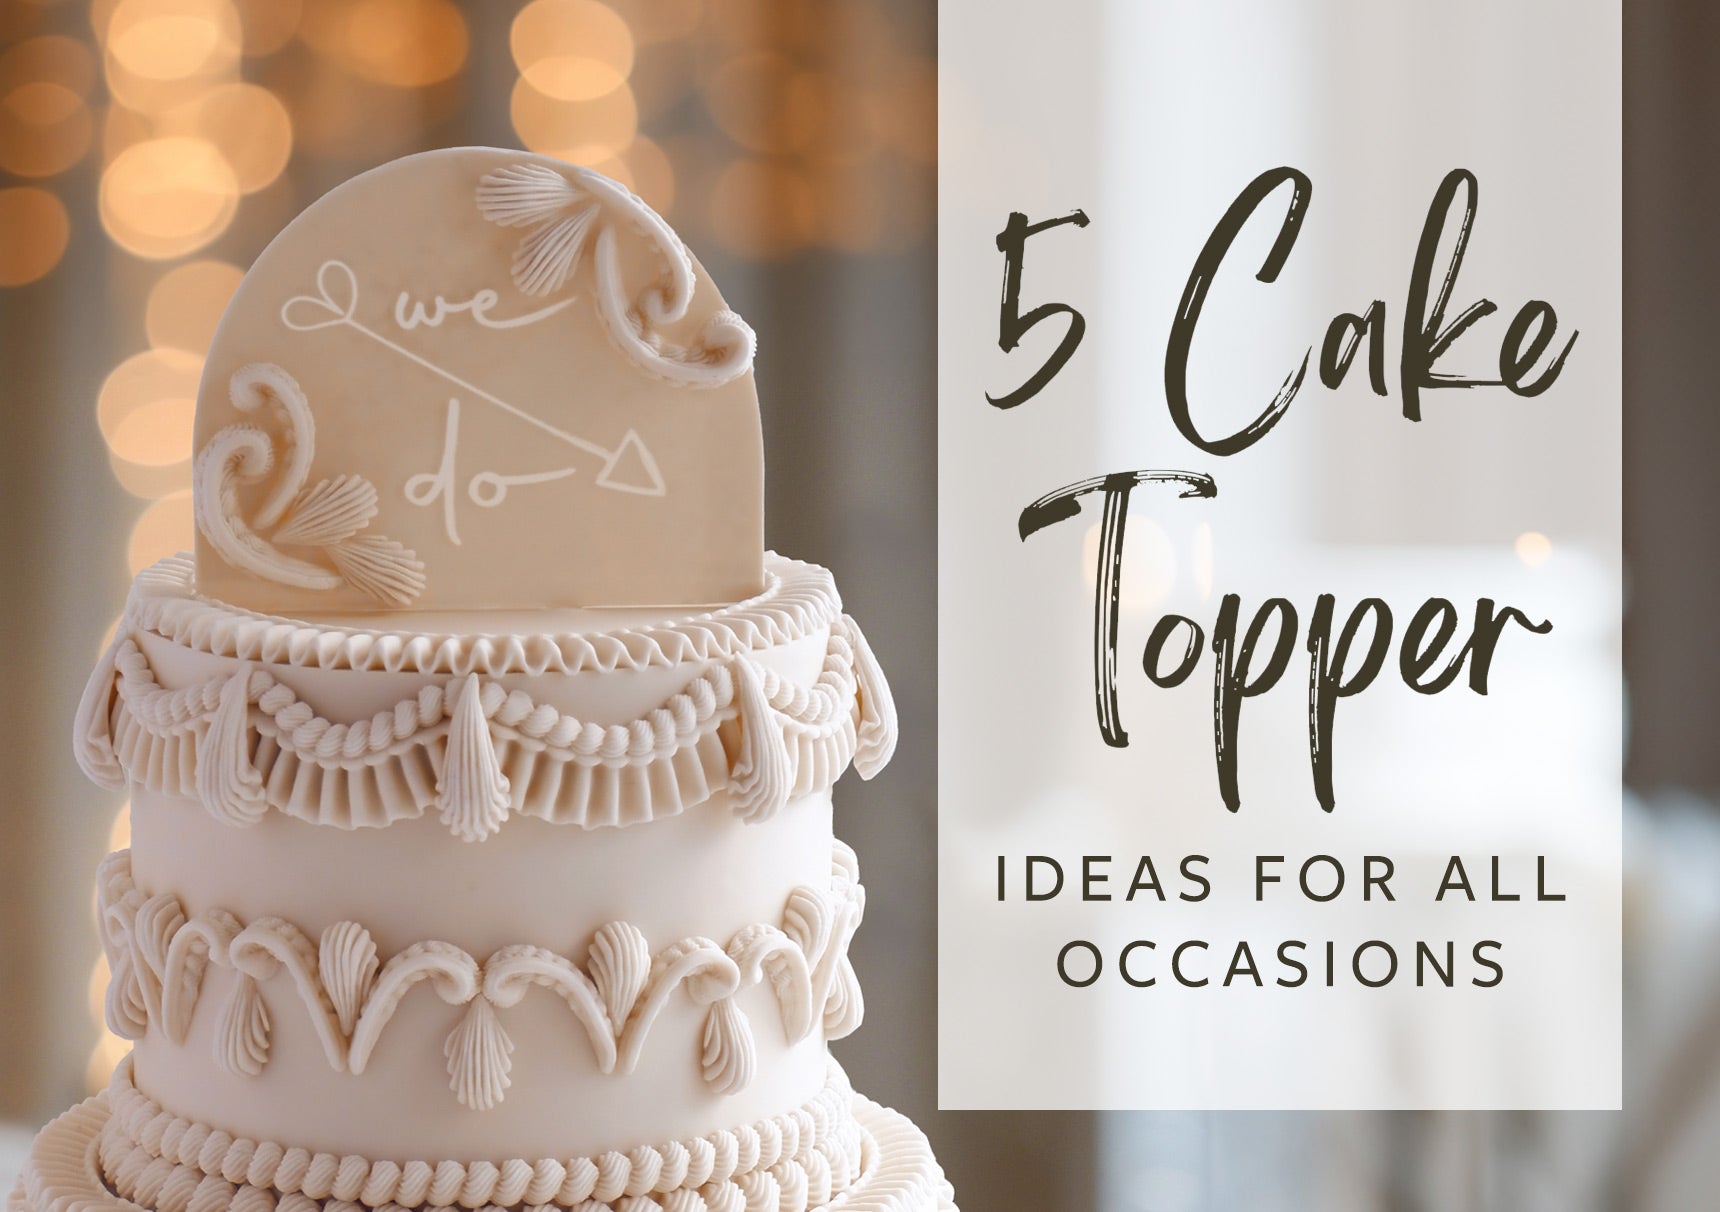 5 Cake Topper Ideas For All Occasions